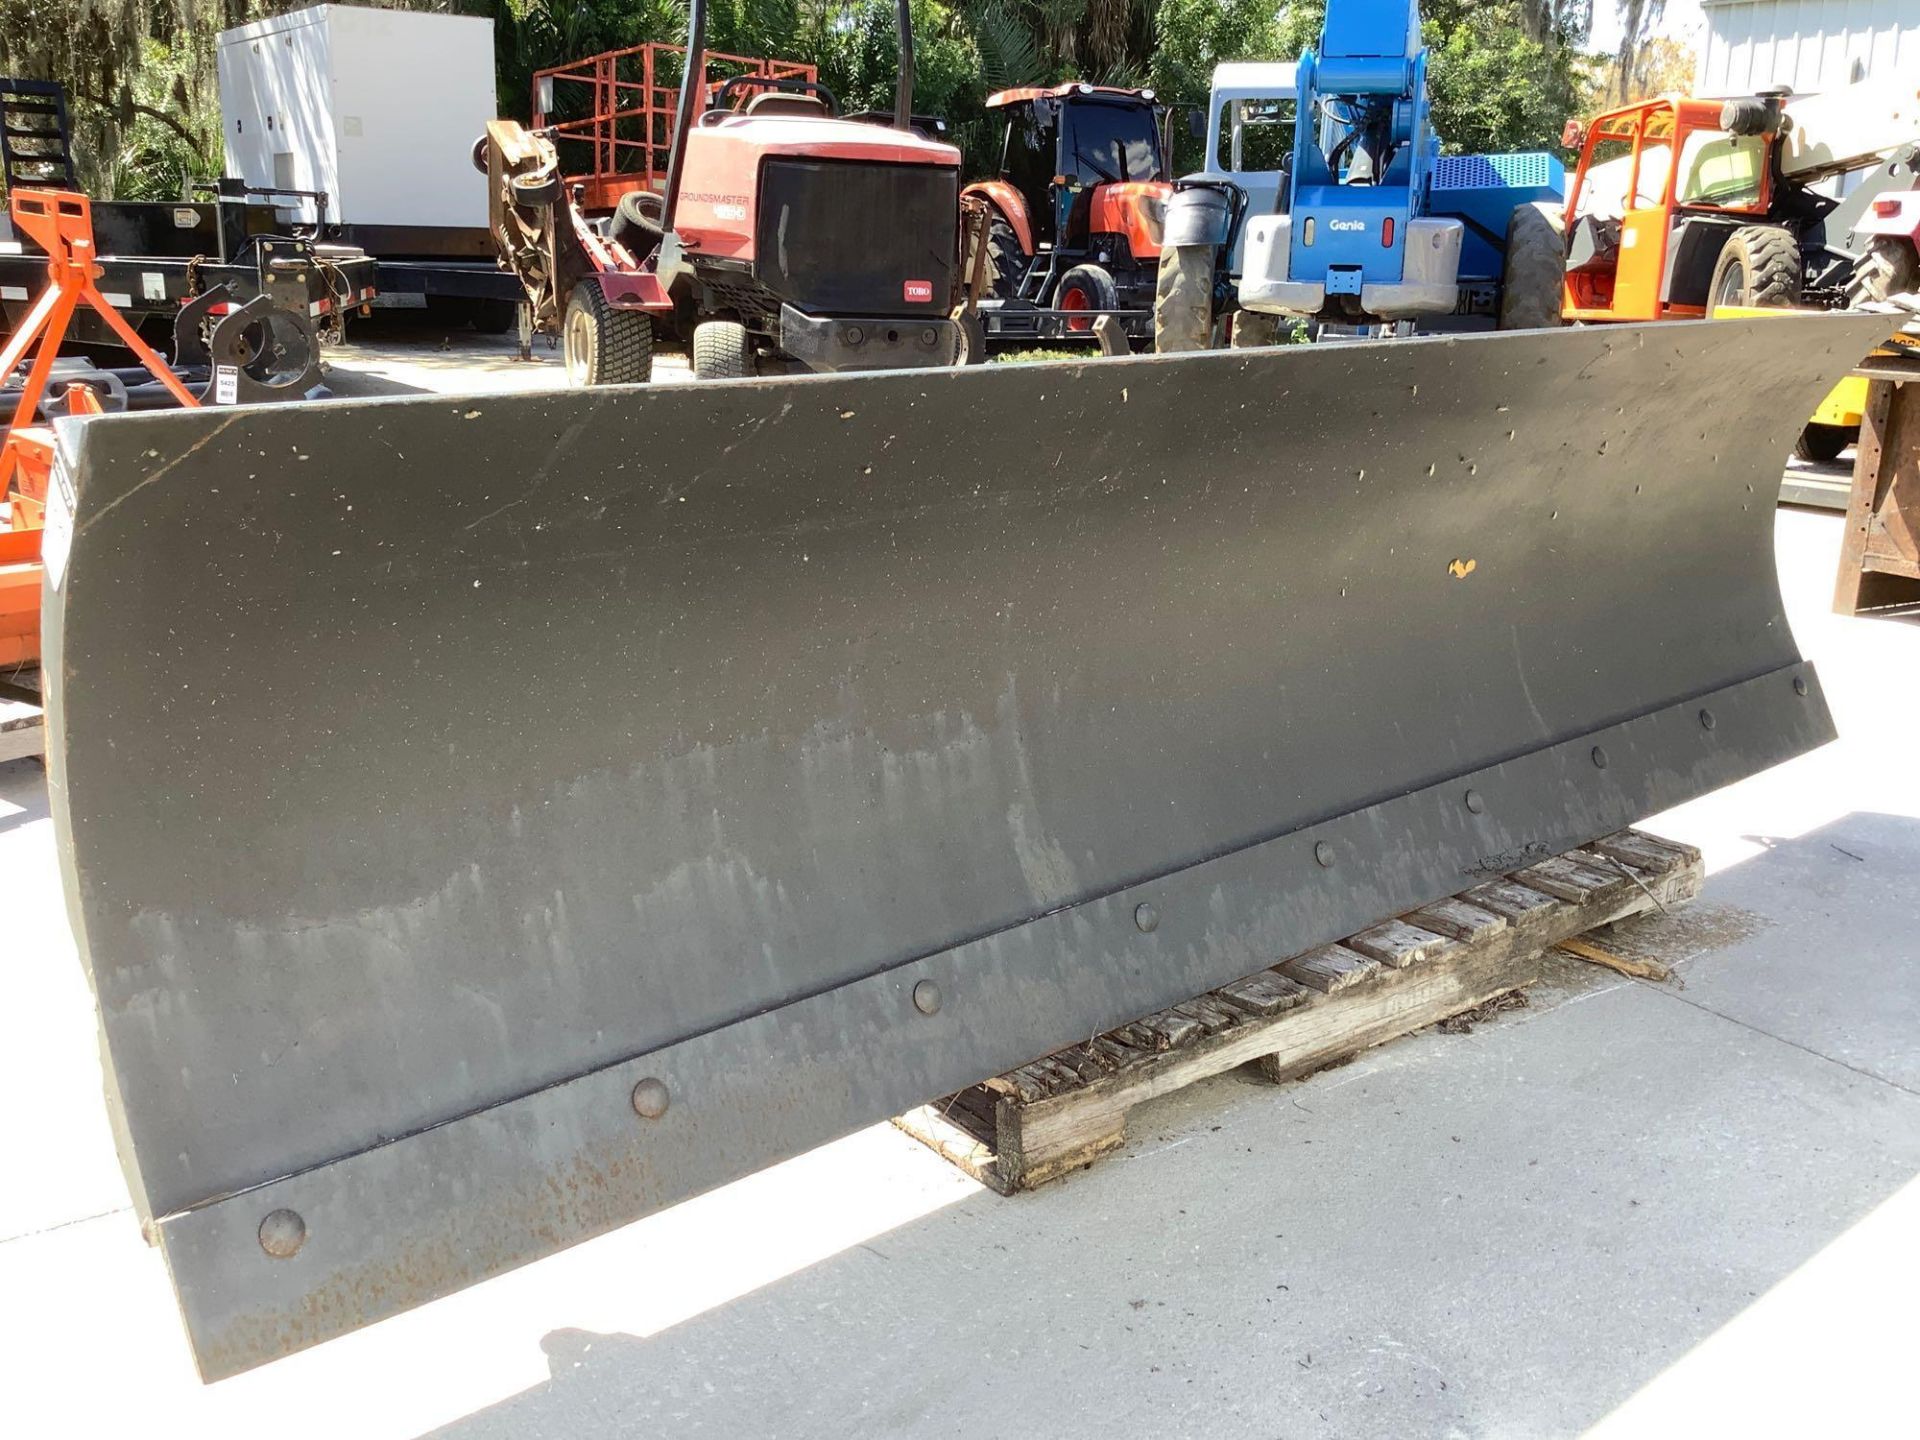 SKID STER PLOW ATTACHMENT APPROX 8FT LONG 2FT WIDE